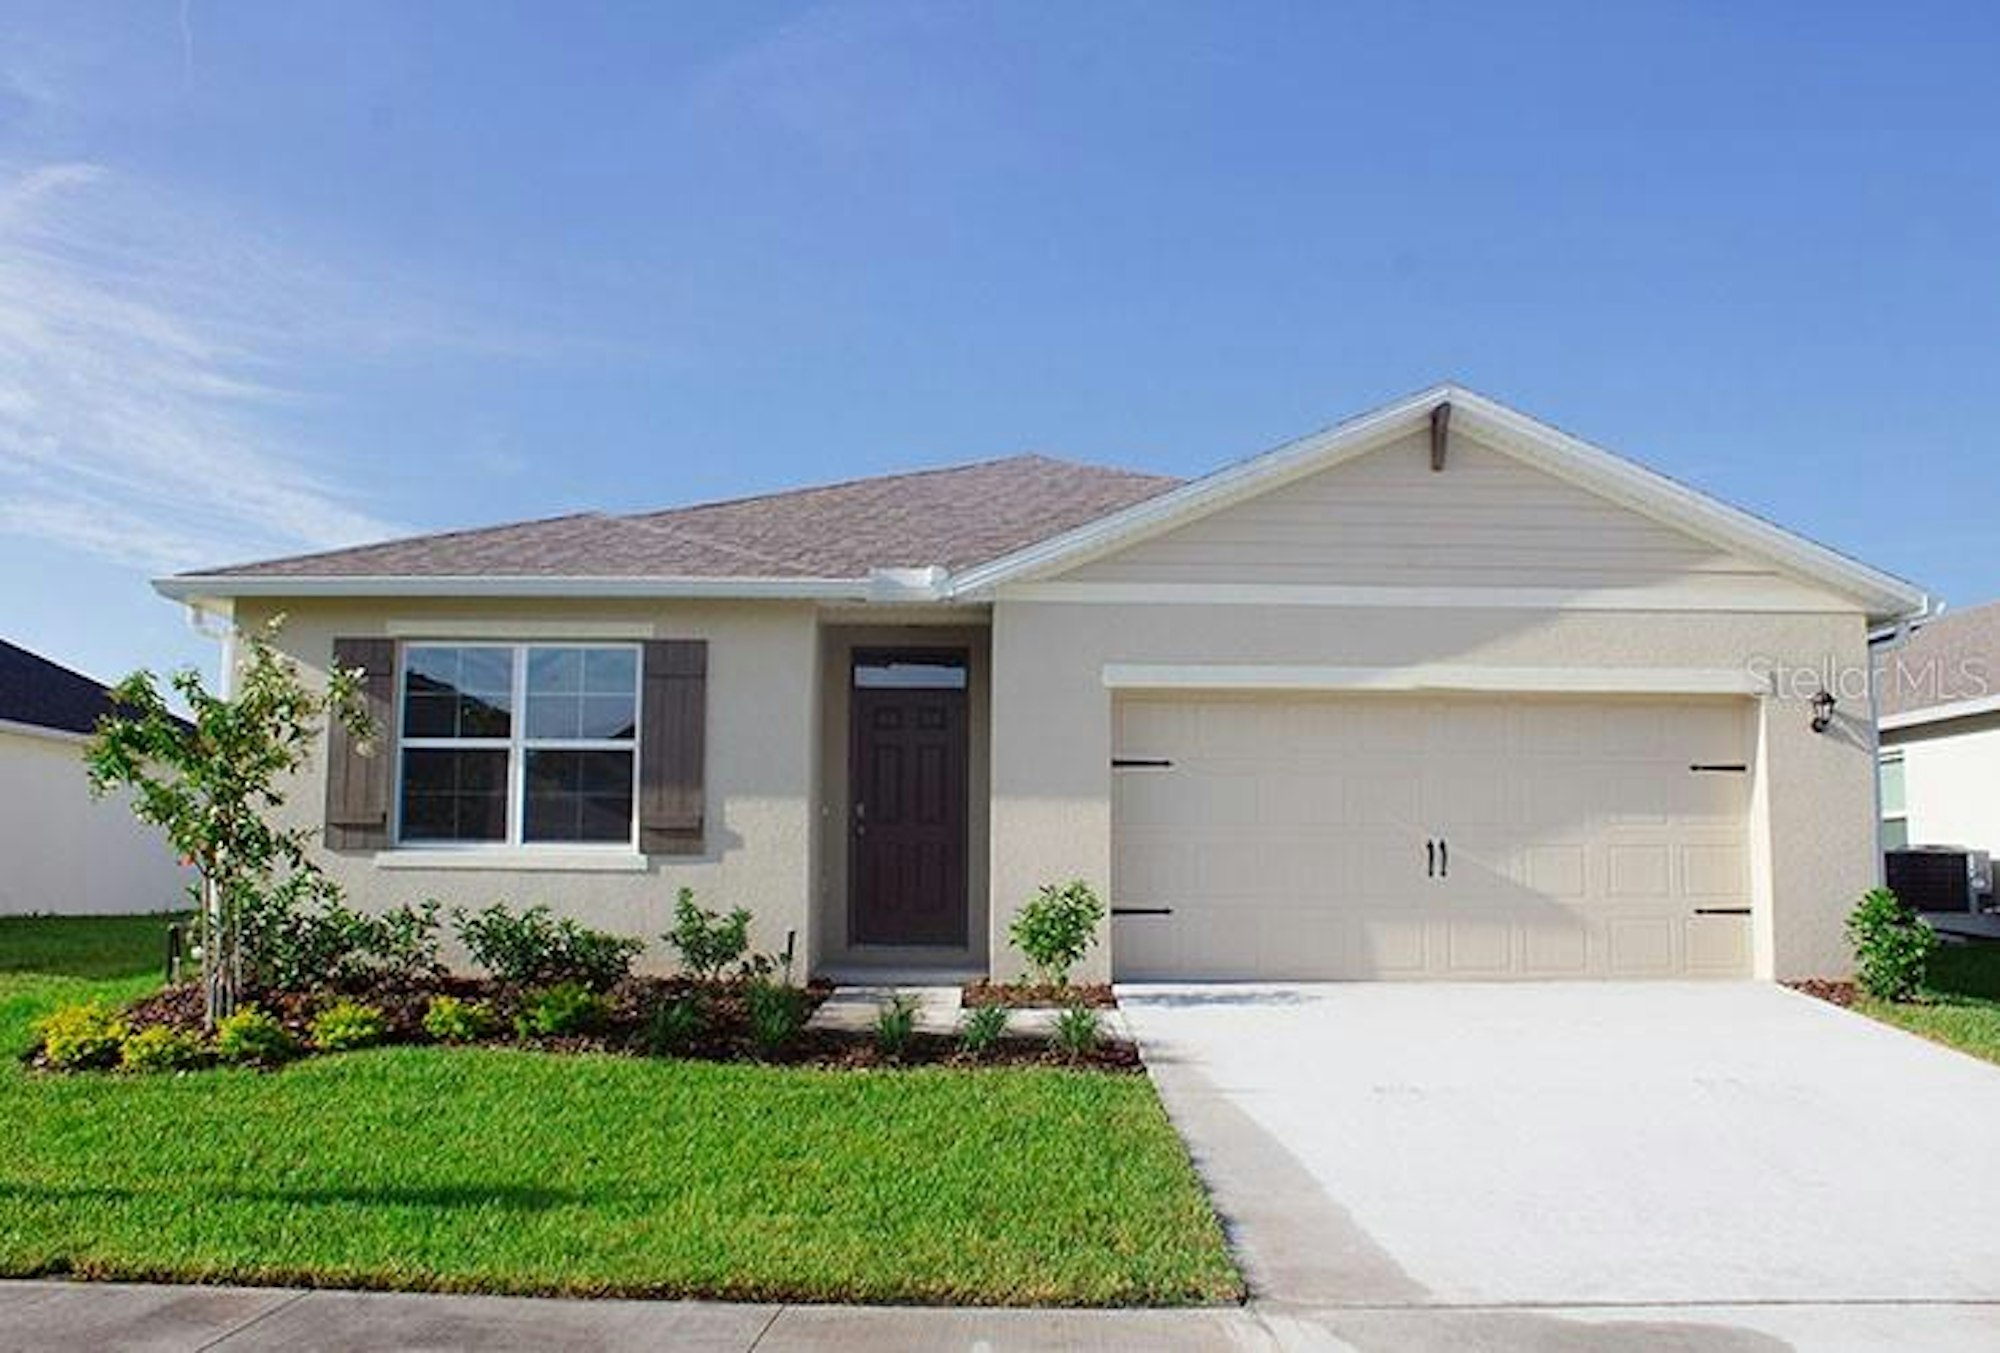 Photo 1 of 34 - 1640 Buttonwood Way, Haines City, FL 33844